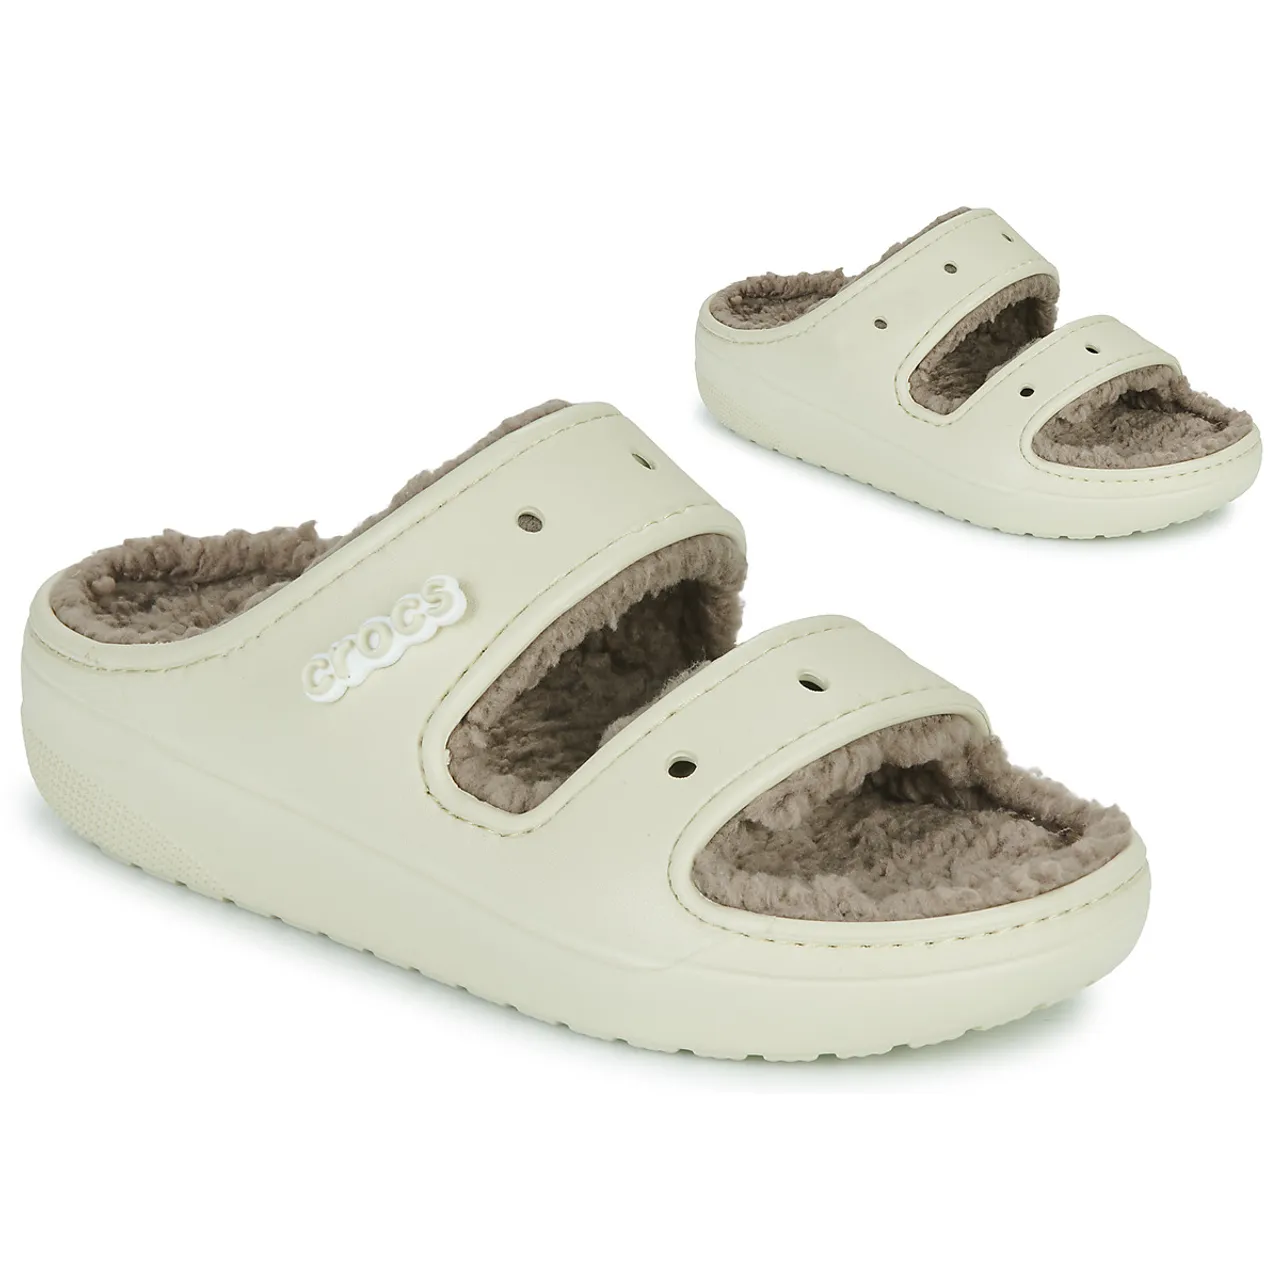 Crocs  CLASSIC COZZZY SANDAL  women's Mules / Casual Shoes in Beige